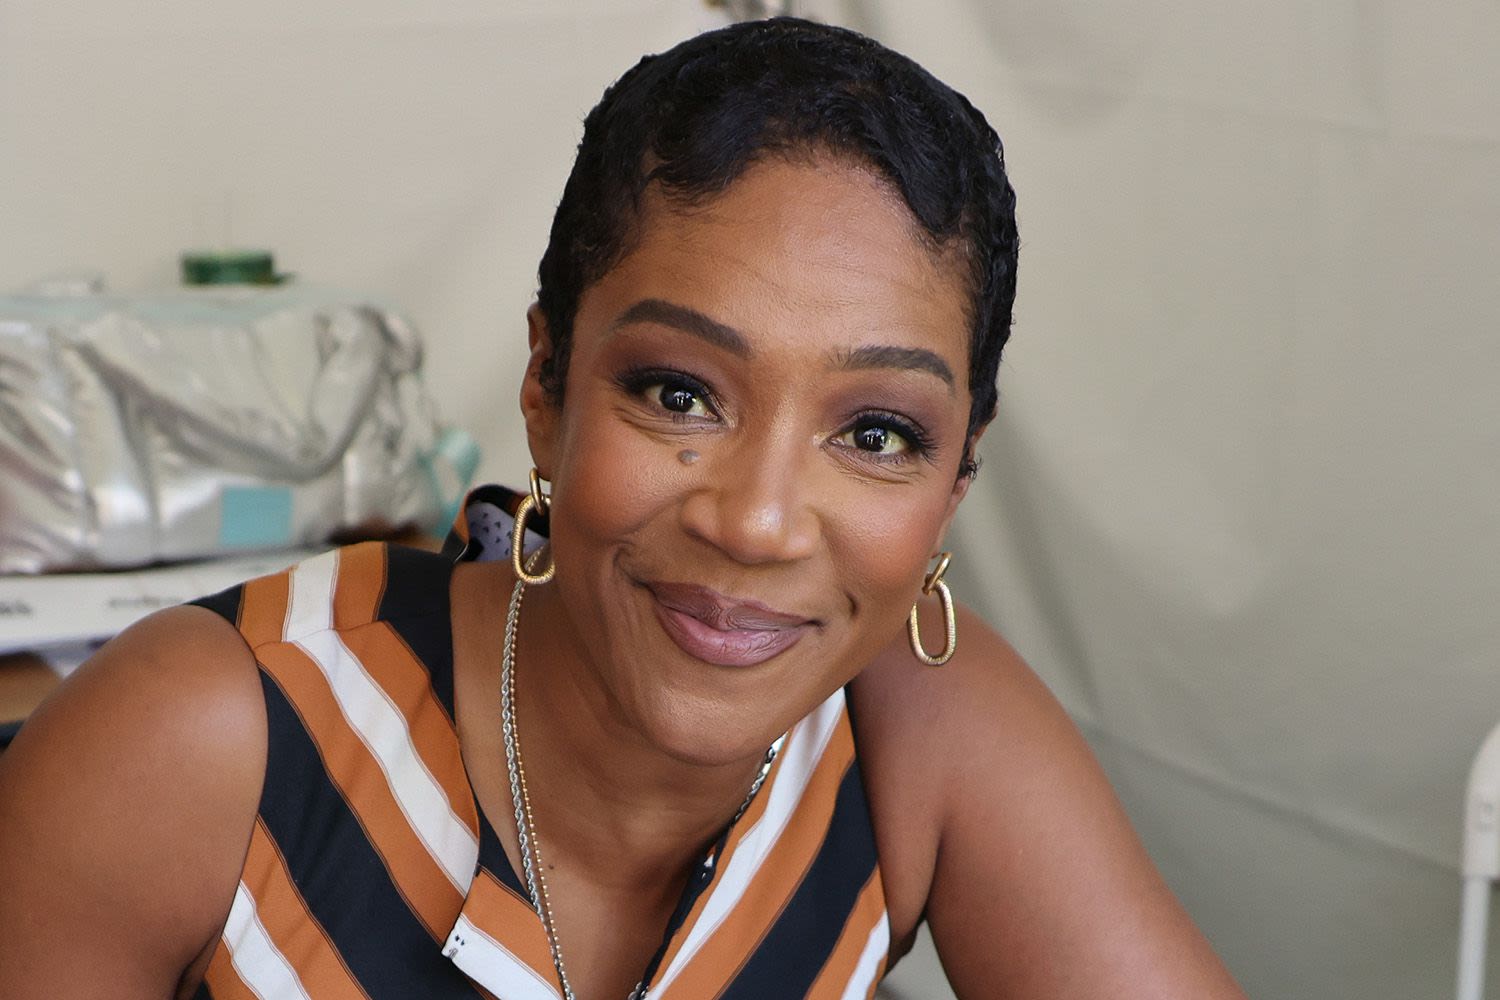 Tiffany Haddish Never Got to Grieve Her Grandmother While Filming“ Haunted Mansion”: ‘I Lost My First Best Friend...